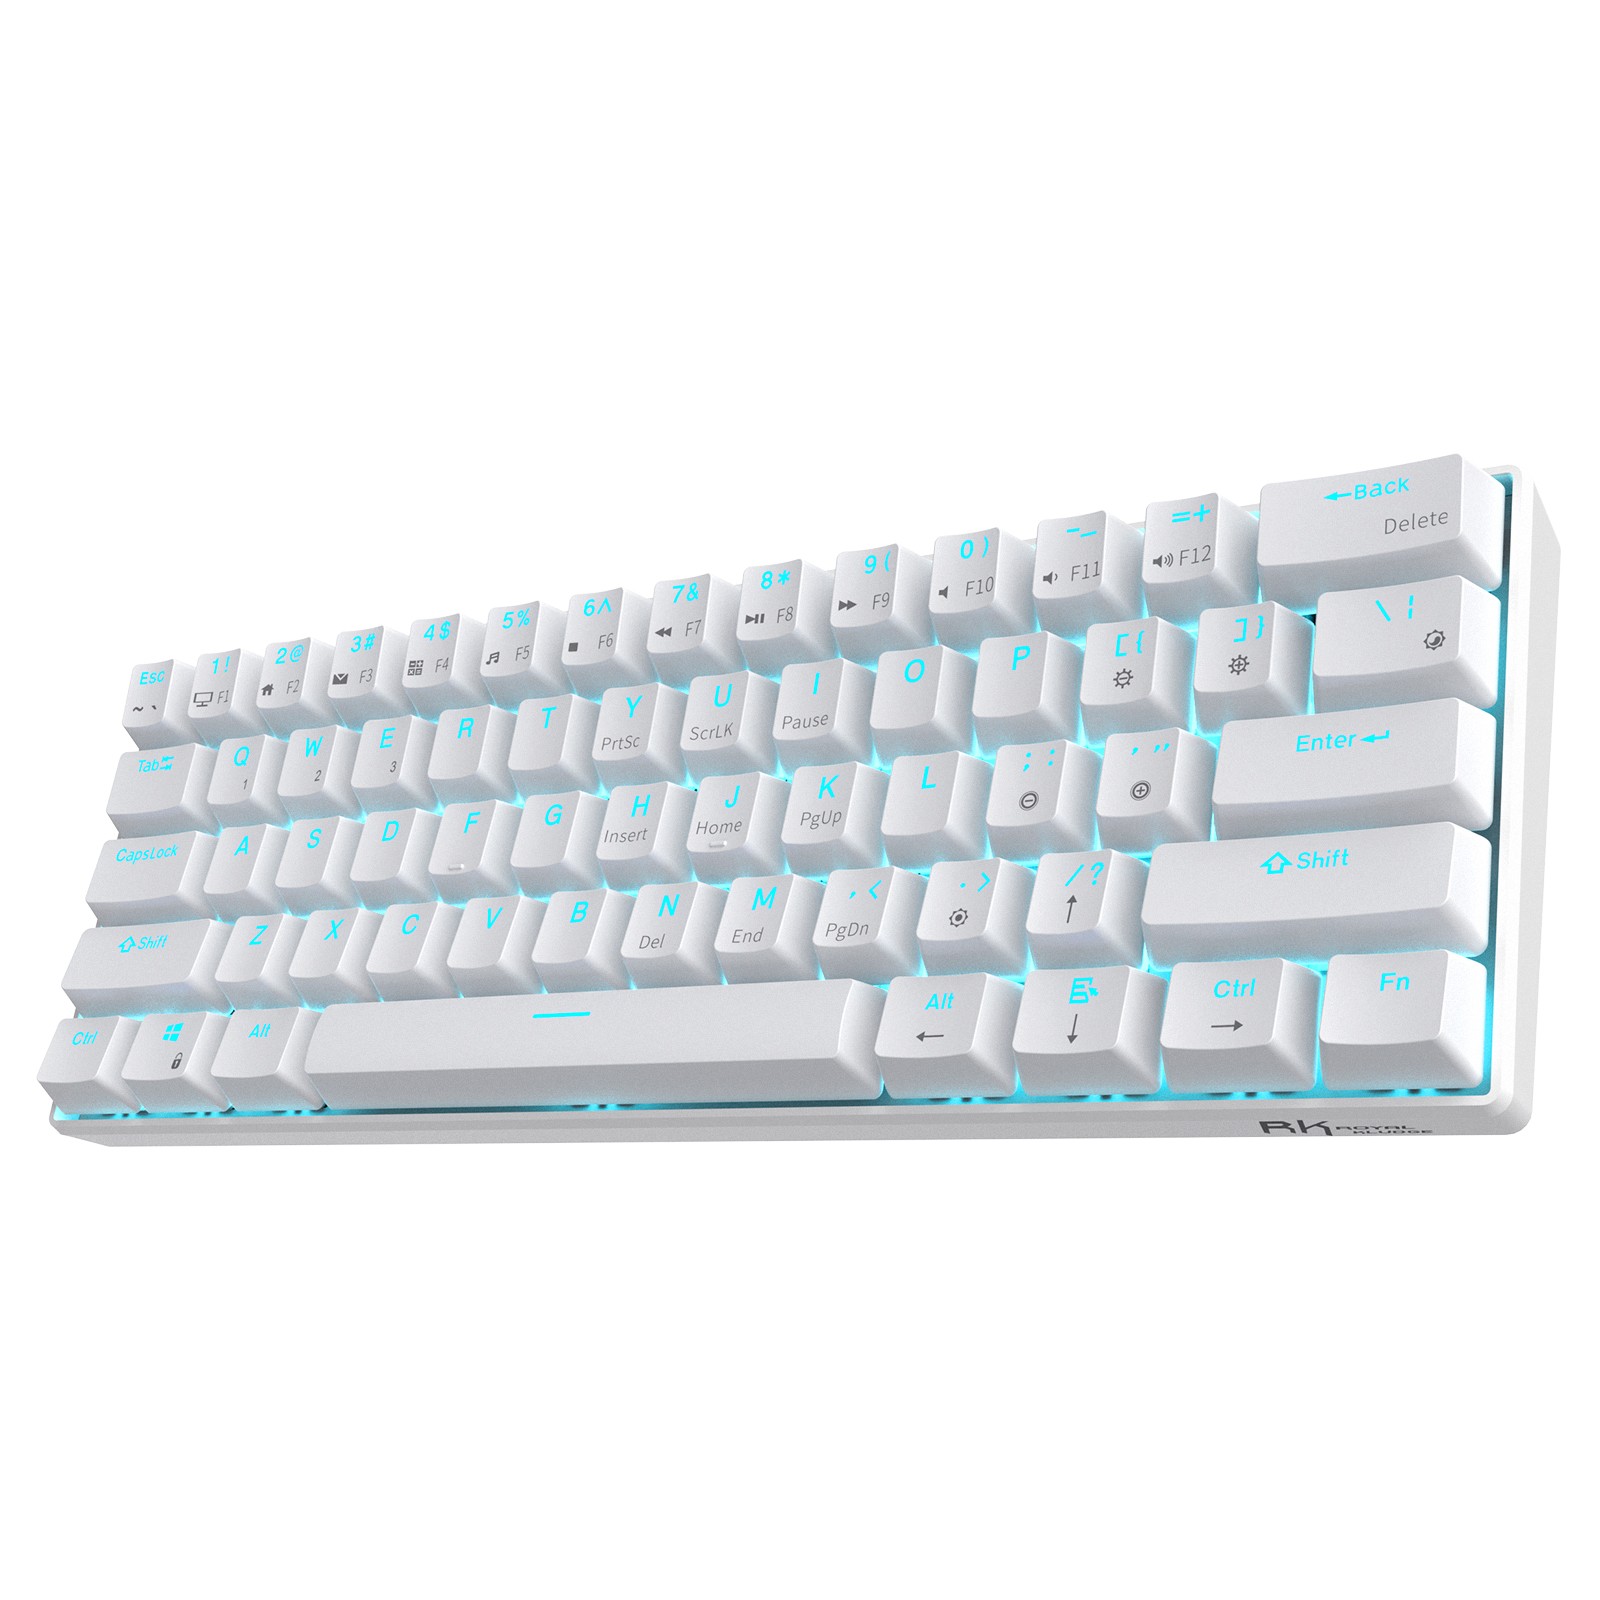 RK ROYAL KLUDGE RK61 Wireless 60% Mechanical Gaming Keyboard, Red Switch